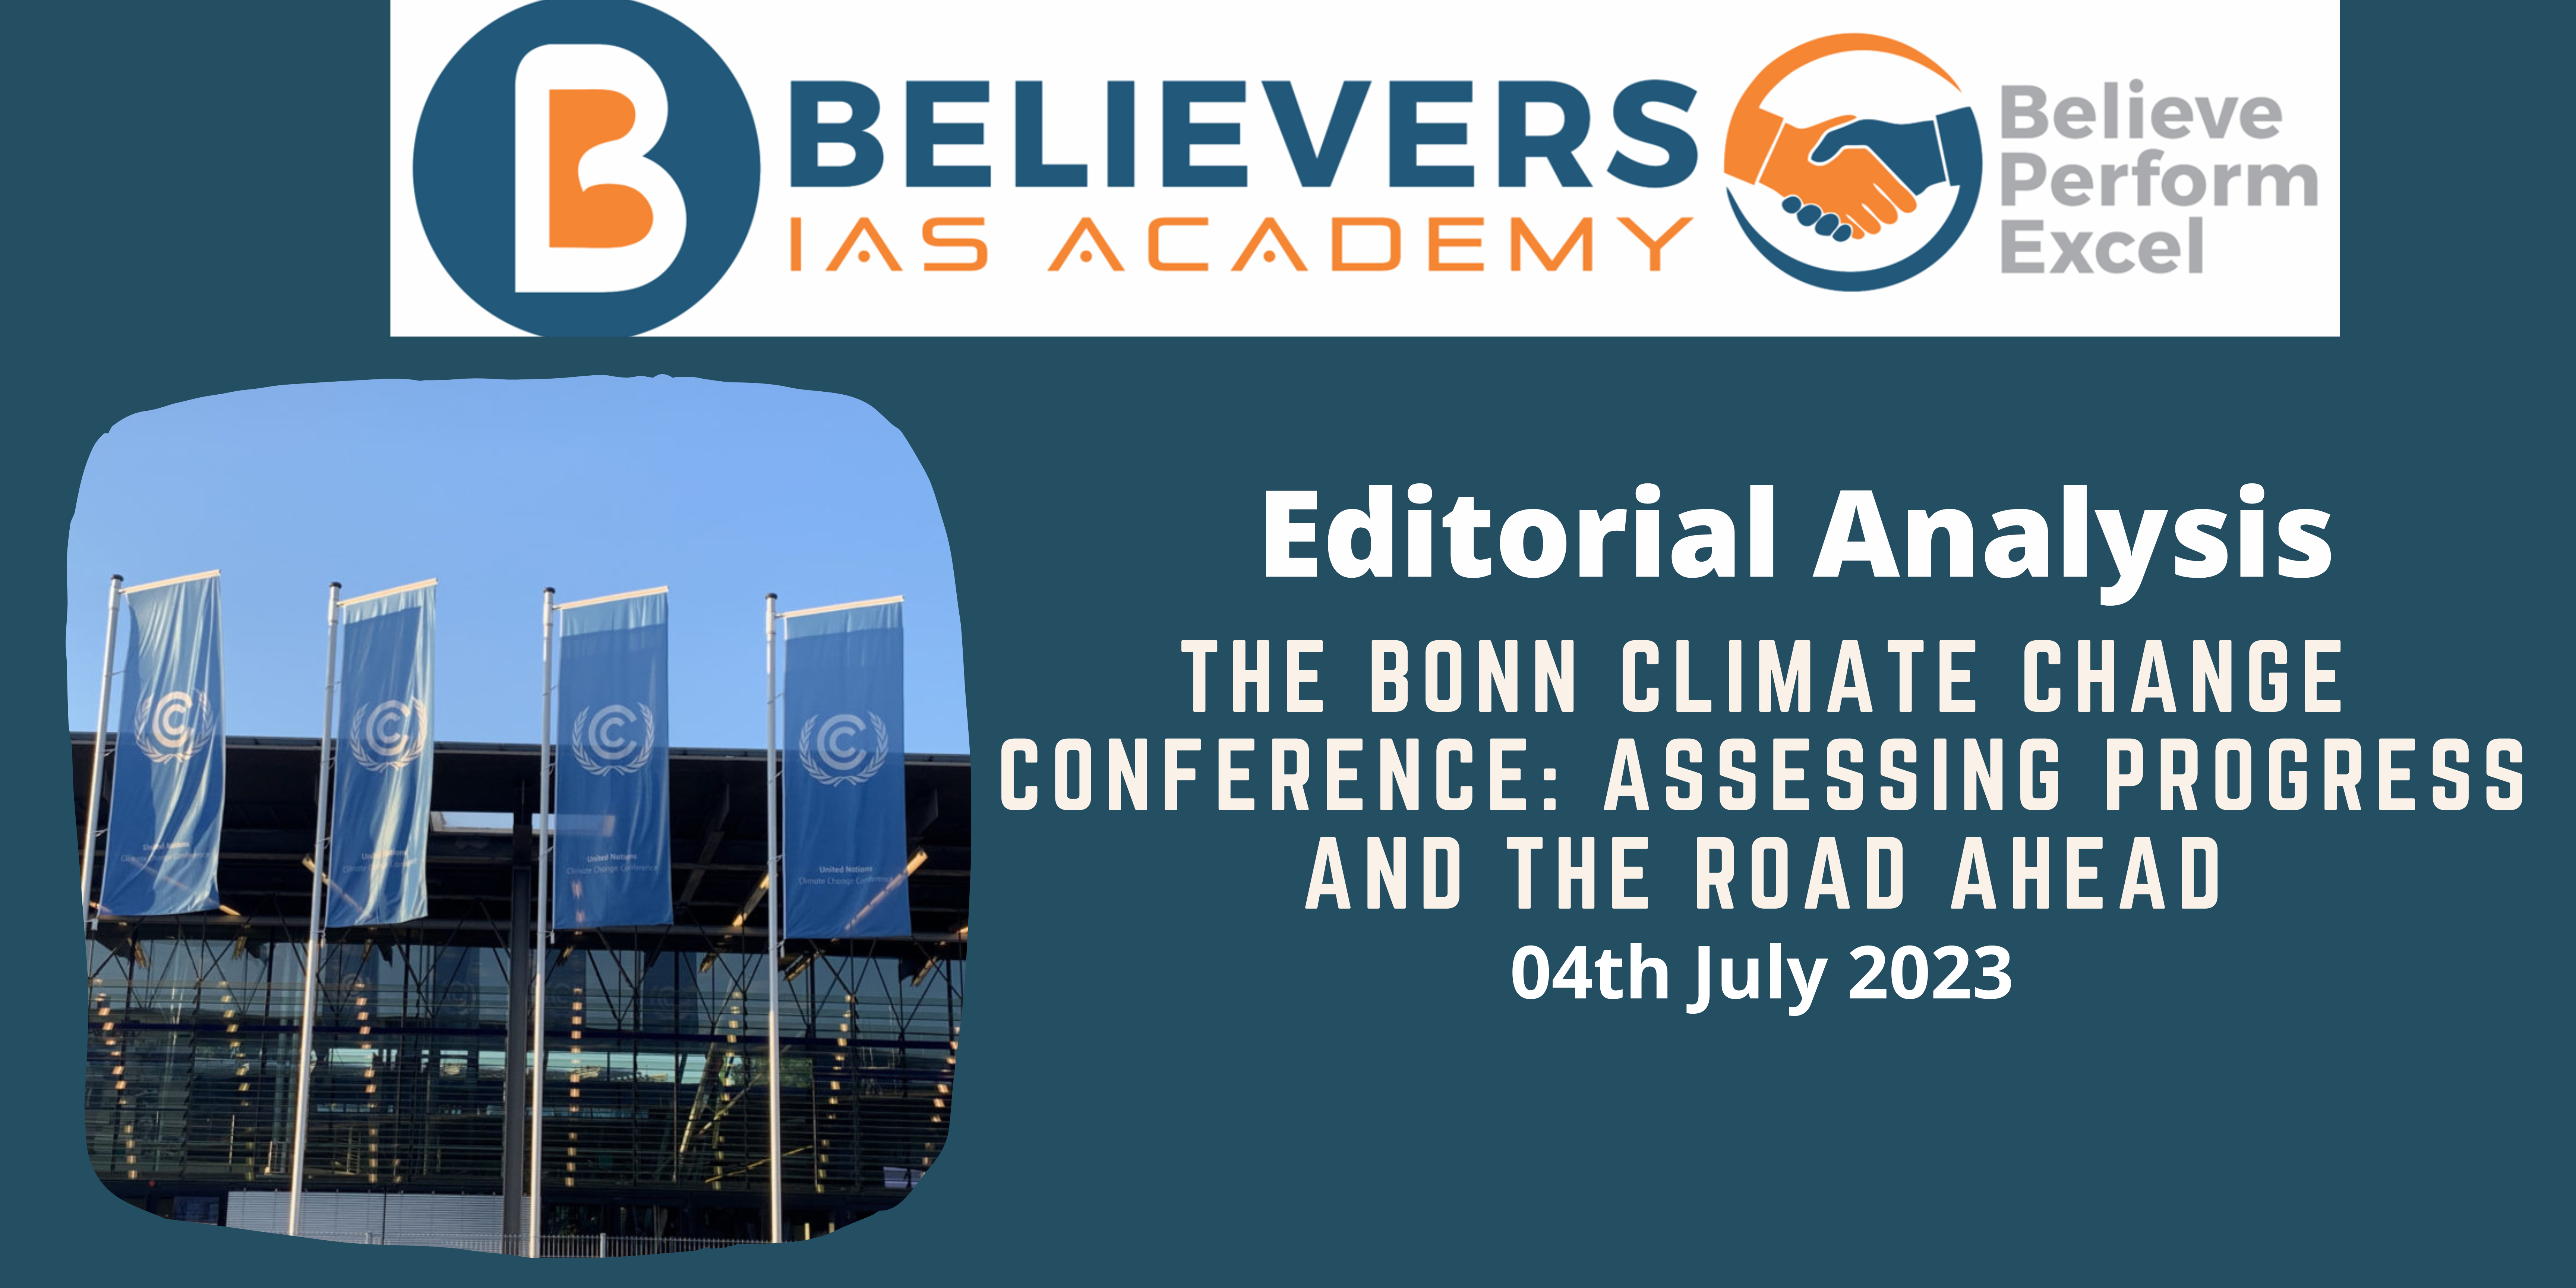 The Bonn Climate Change Conference: Assessing Progress and the Road Ahead